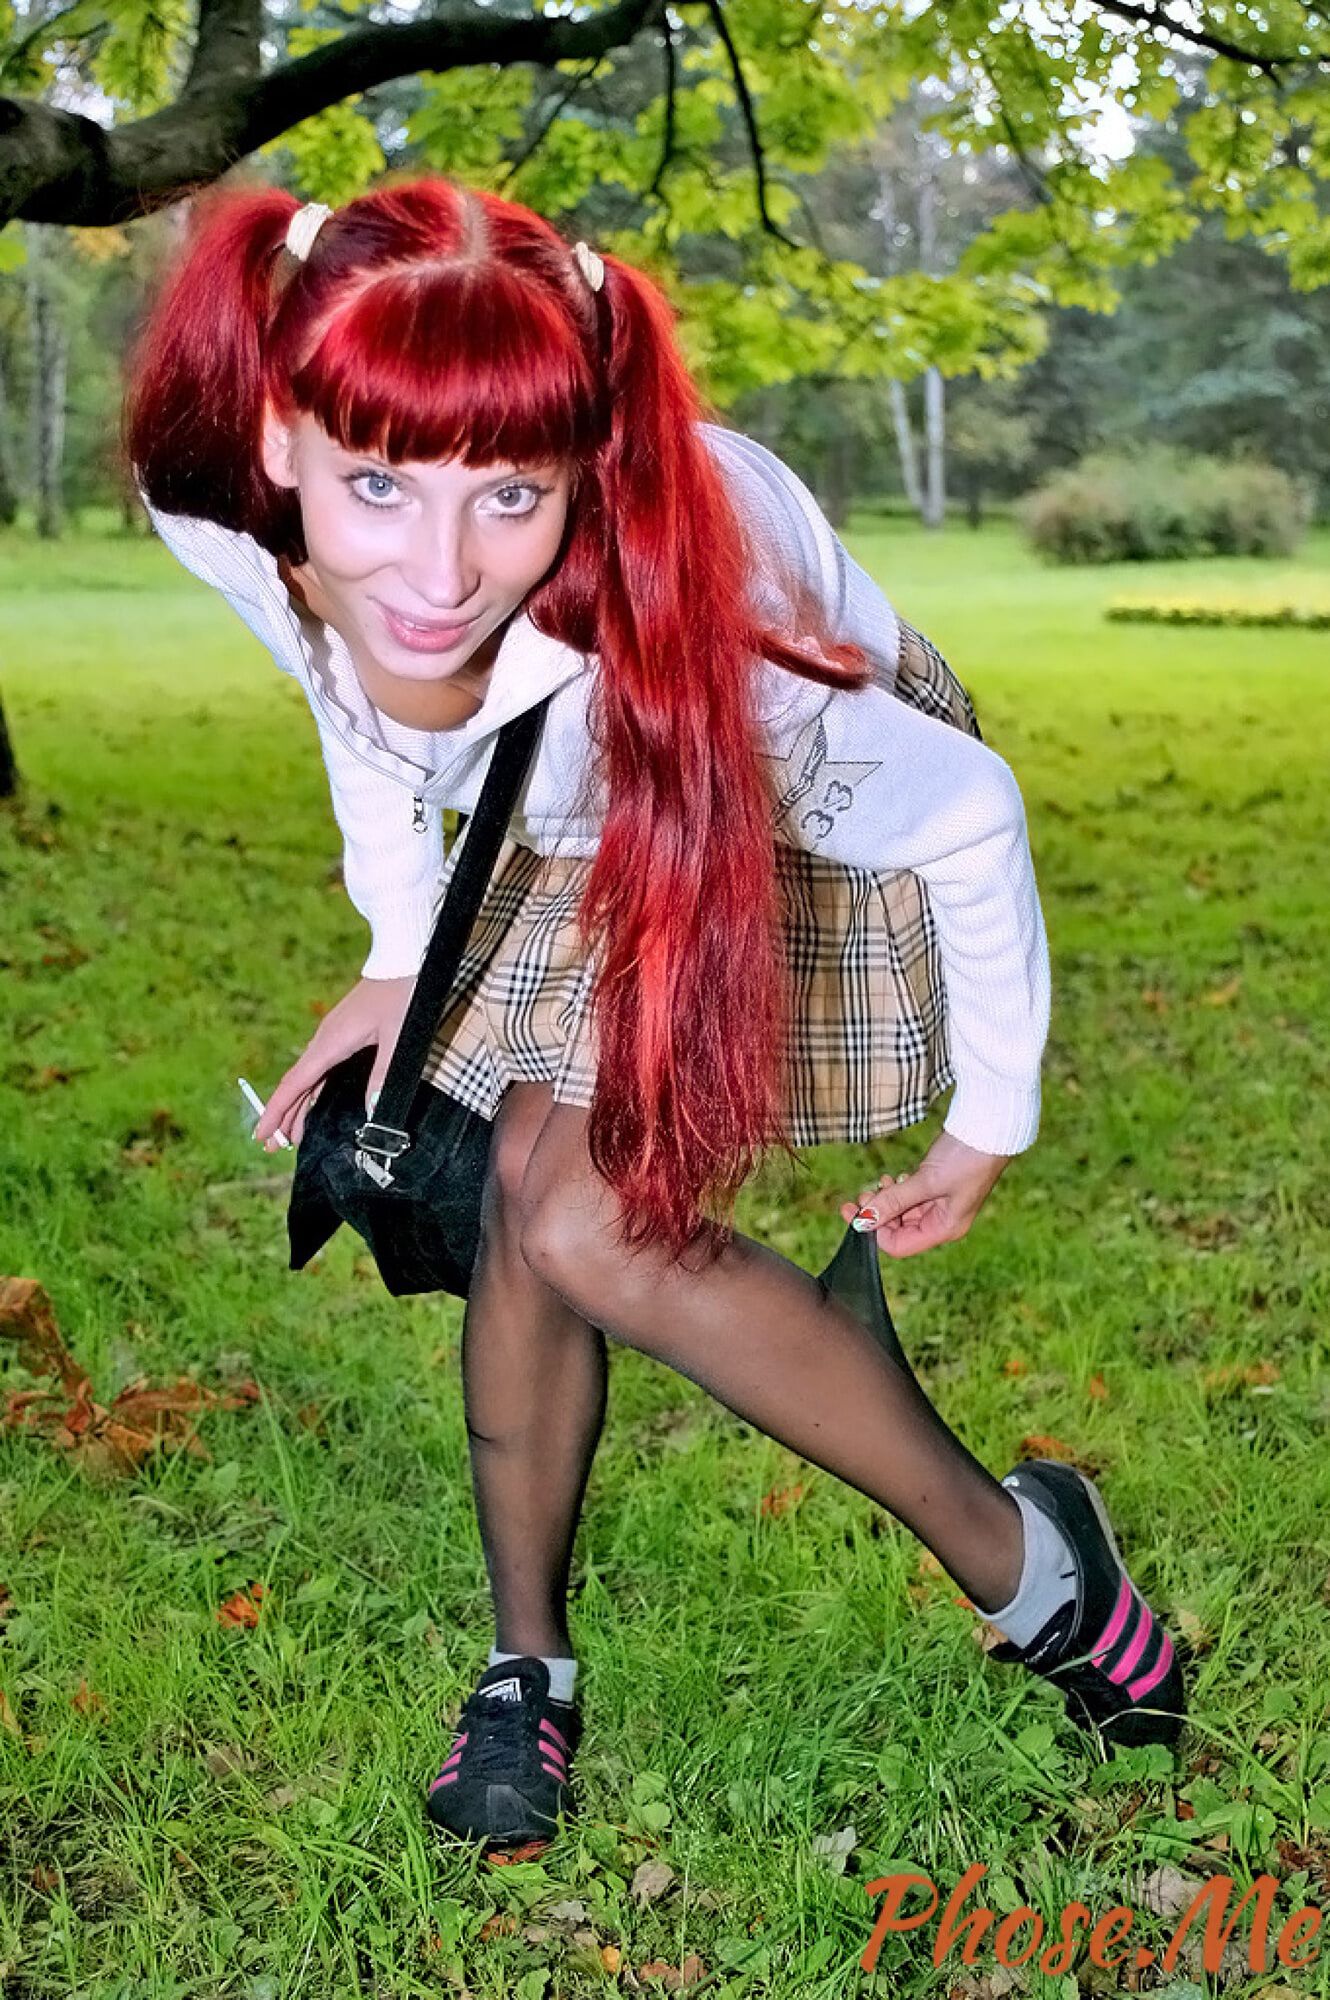 Redhead Outdoors In Plaid Skirt and Black Pantyhose #8